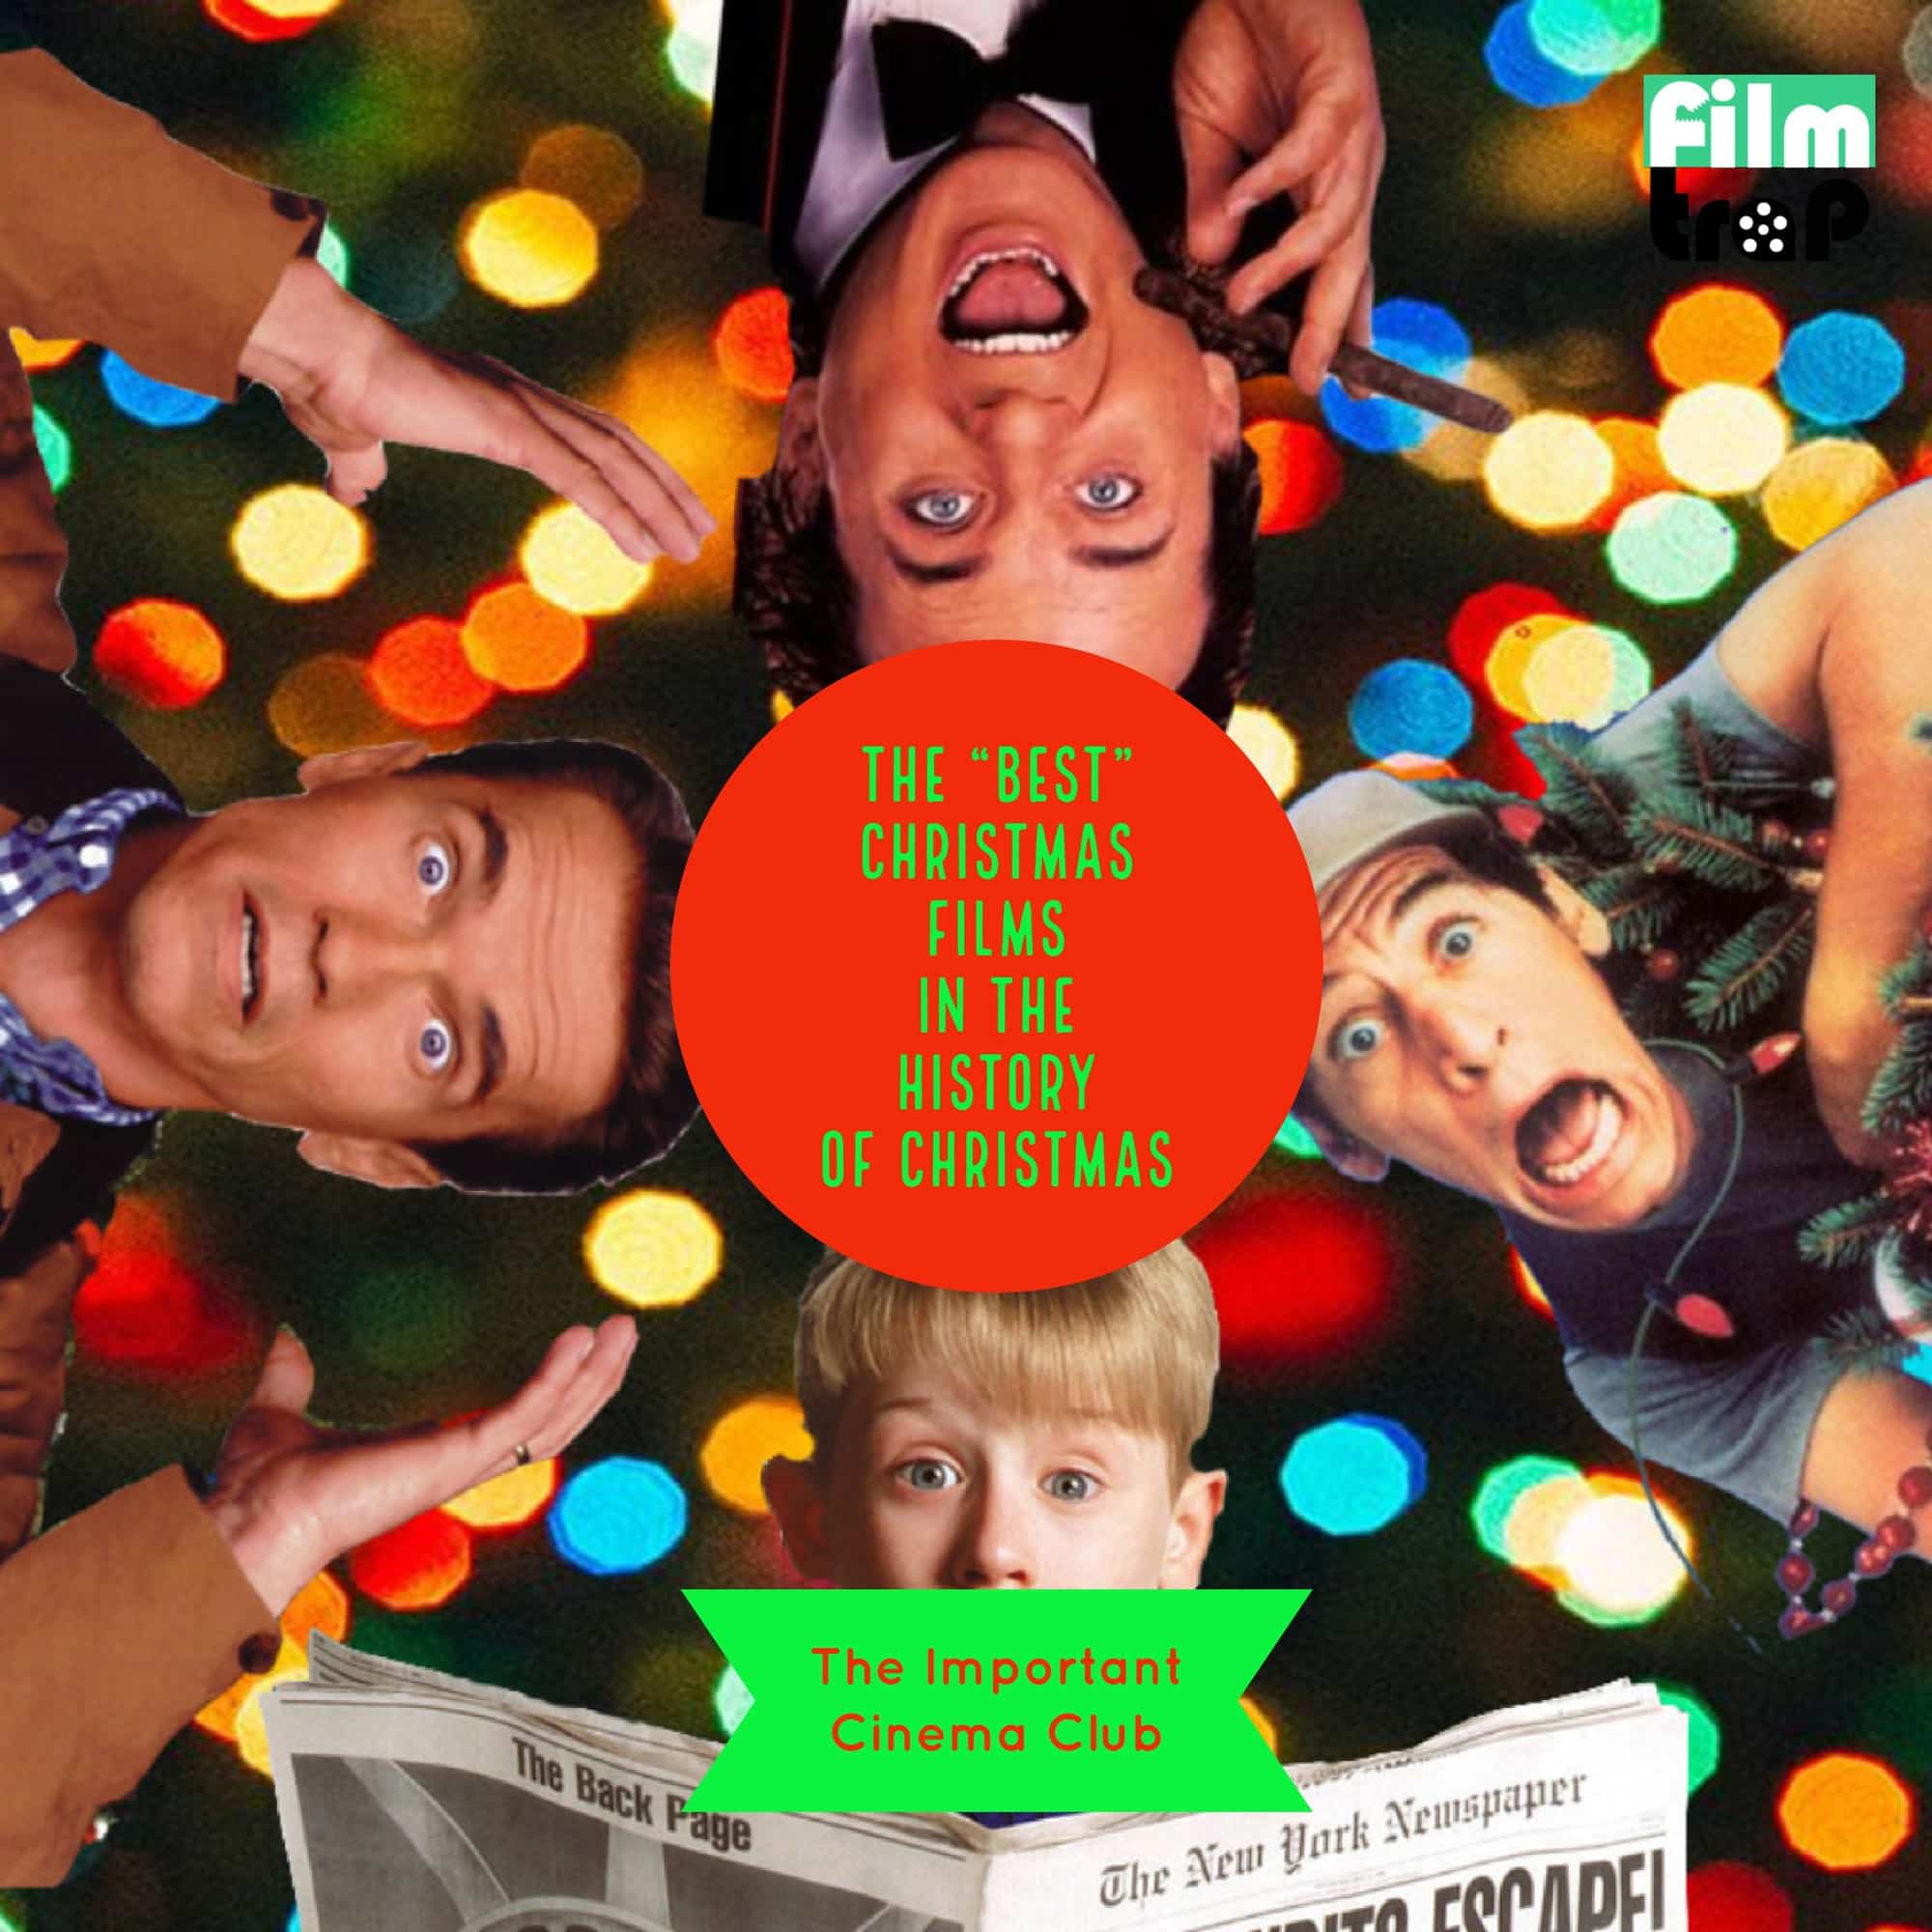 ICC #98 – The “Best” Christmas Films In The History of Christmas